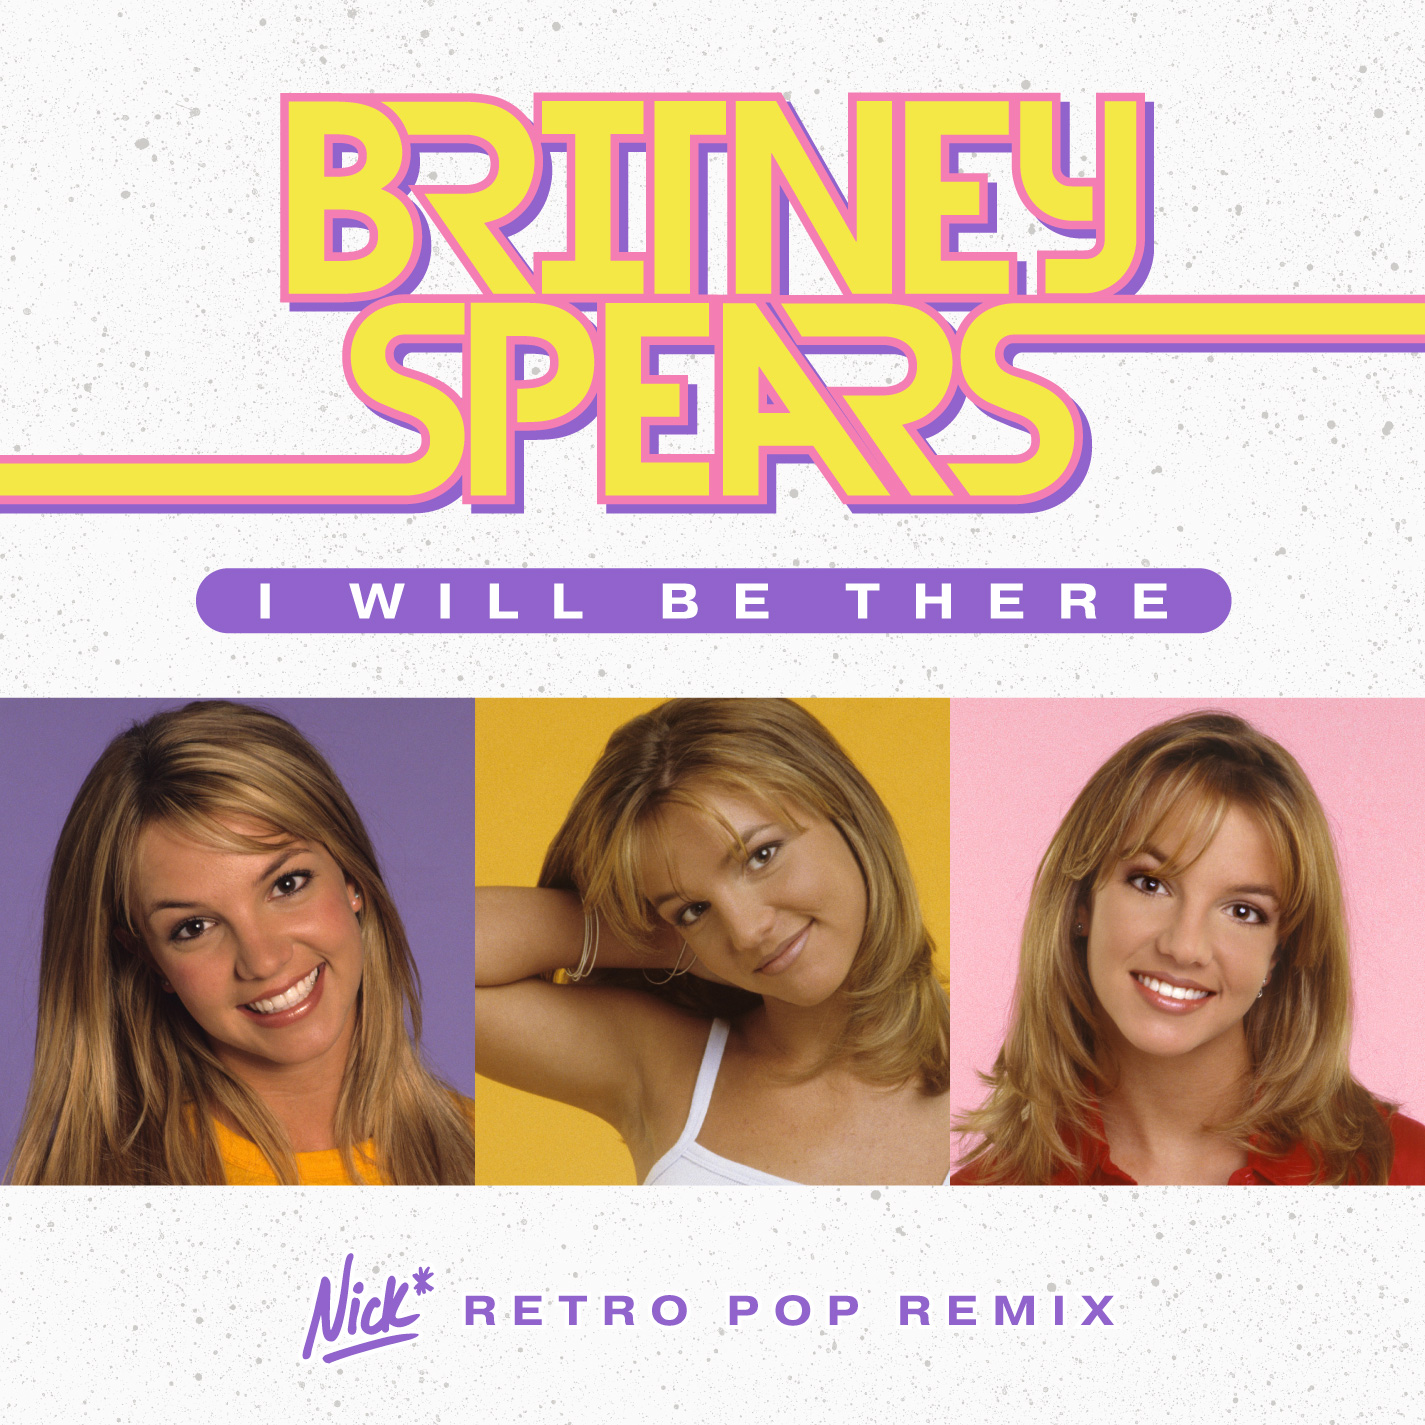 Britney Spears - I Will Be There Nick* Retro Pop Remix